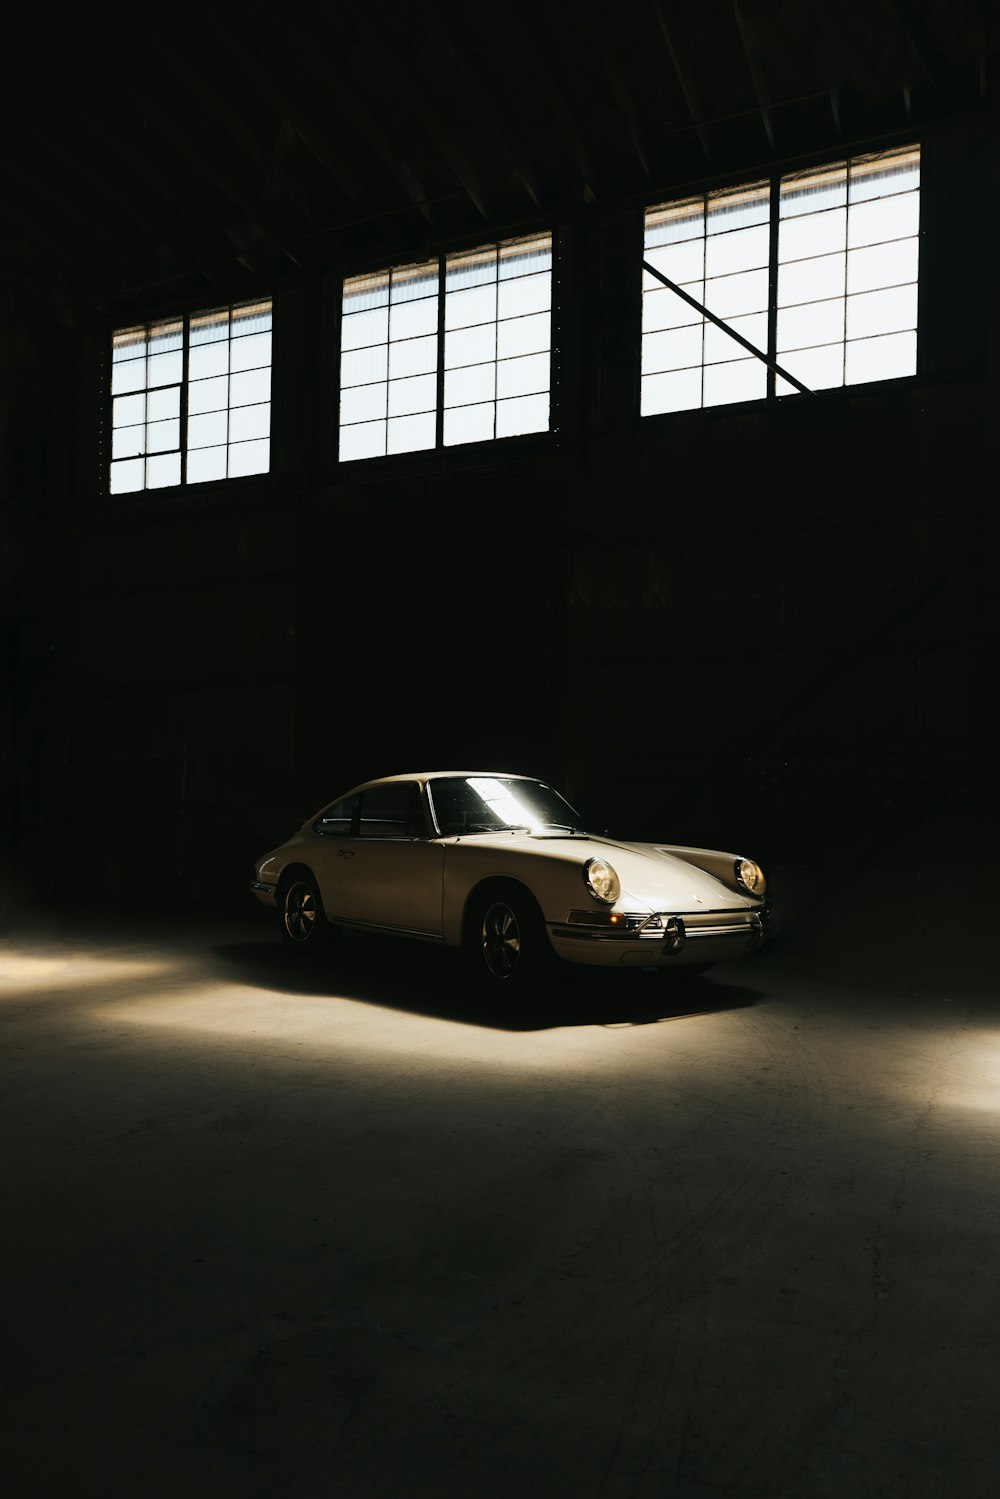 a car is parked in a dimly lit garage